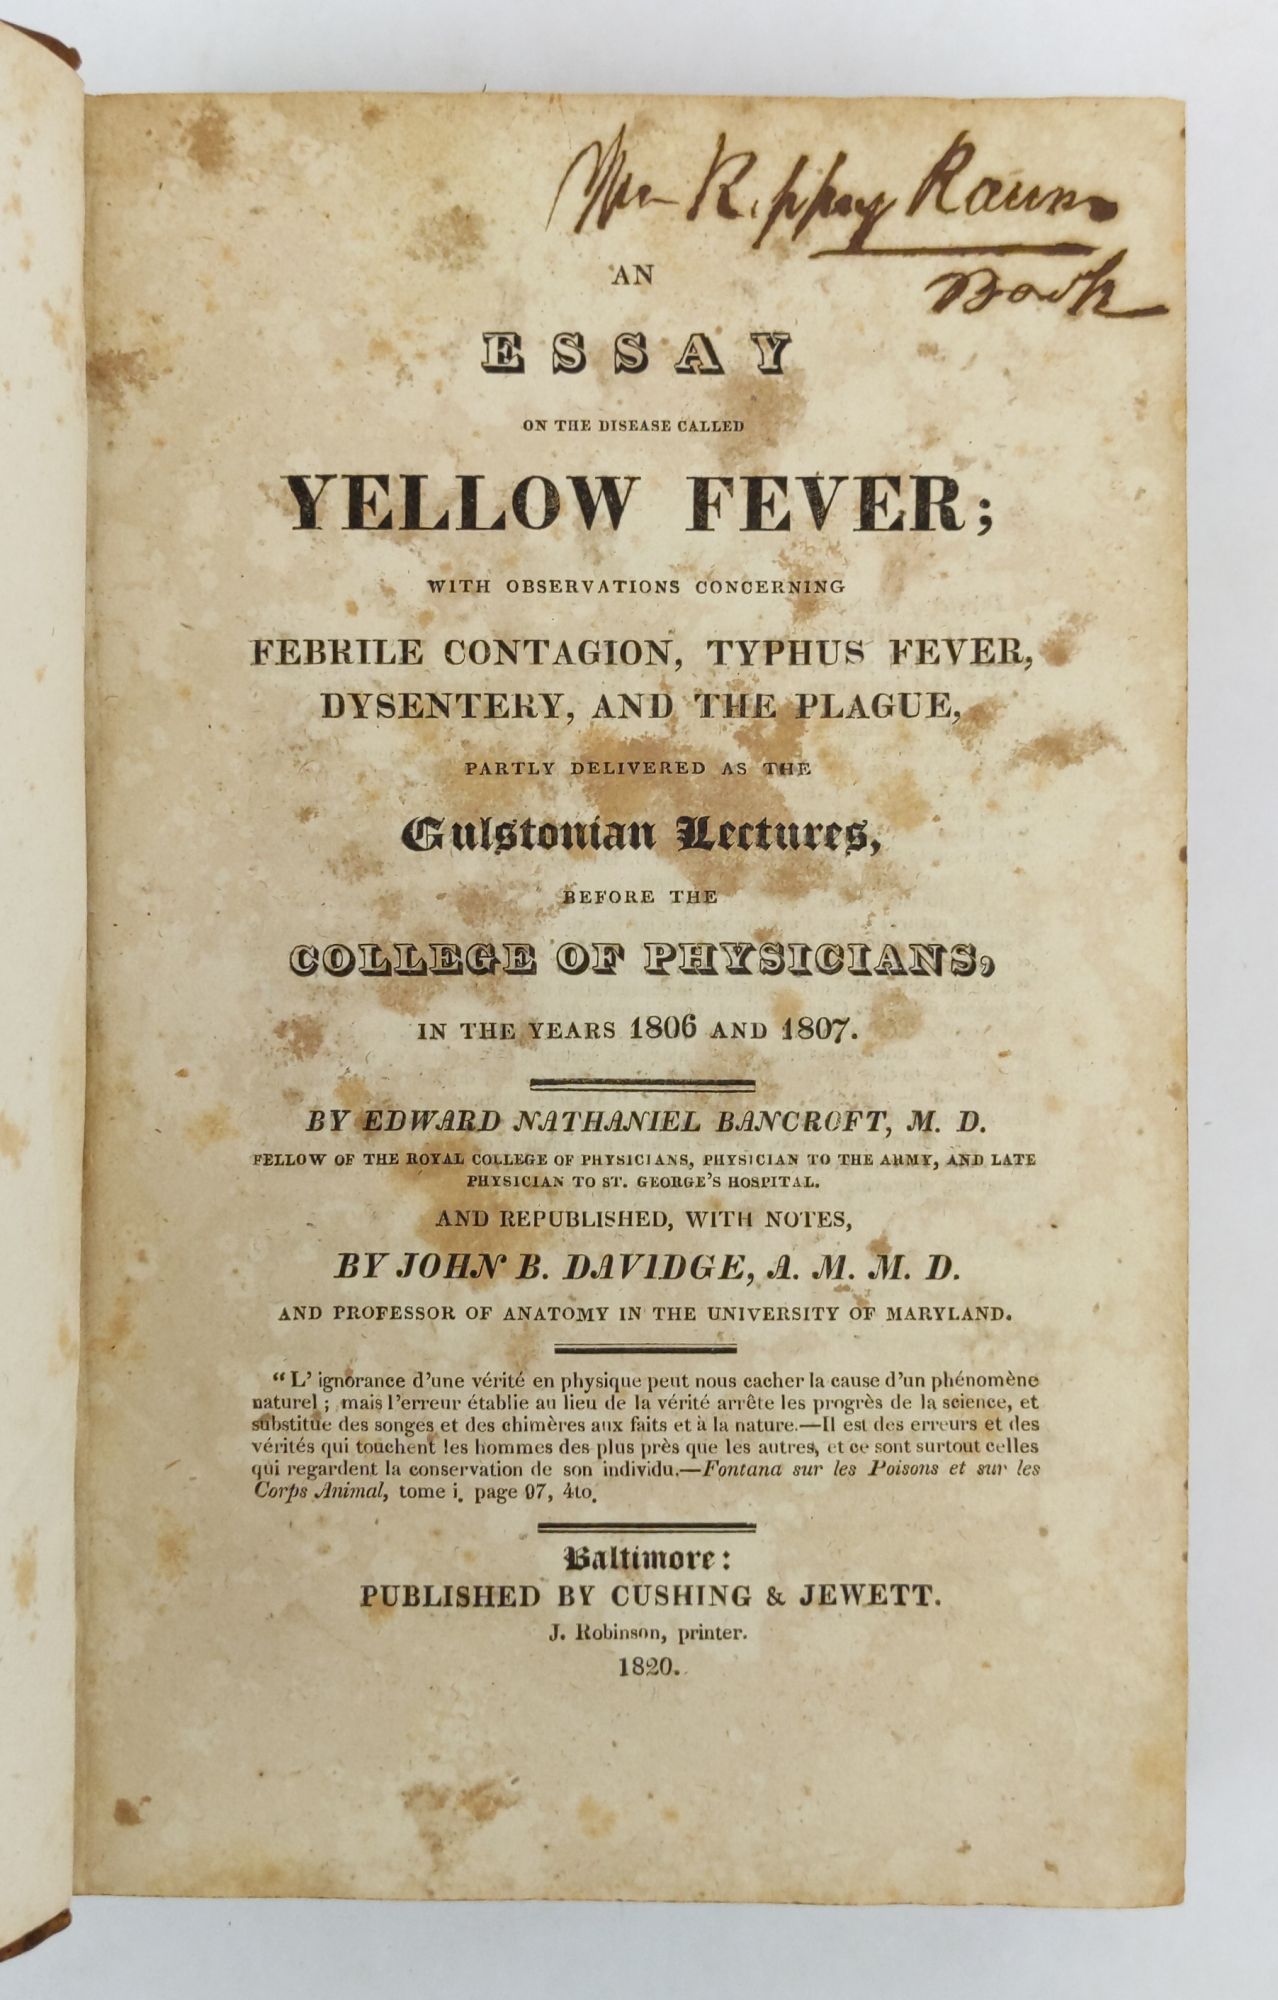 Product Image for AN ESSAY ON THE DISEASE CALLED YELLOW FEVER; WITH OBSERVATIONS CONCERNING FEBRILE CONTAGION, TYPHUS FEVER, DYSENTERY, AND THE PLAGUE, PARTLY DELIVERED AS THE GULSTONIAN LECTURES, BEFORE THE COLLEGE OF PHYSICIANS, IN THE YEARS 1806 AND 1807